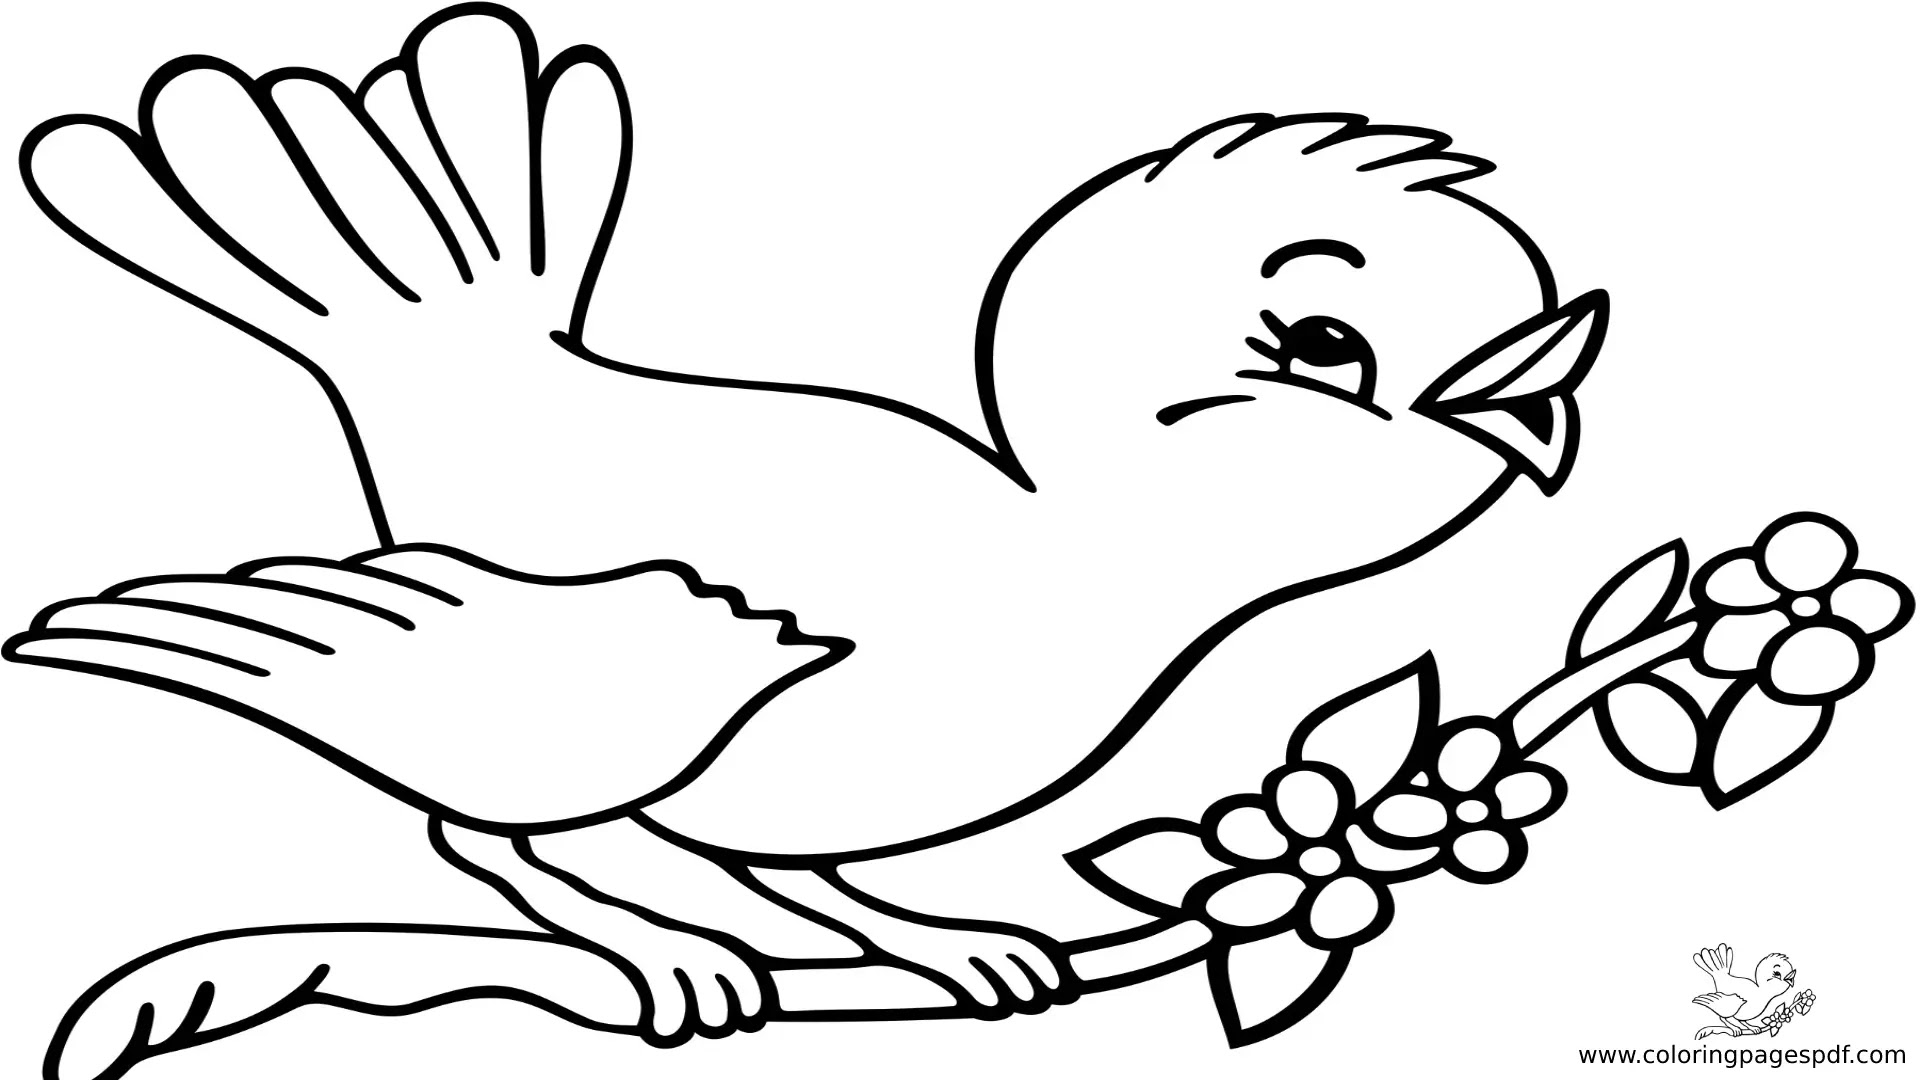 Coloring Pages Of A Small Bird Singing